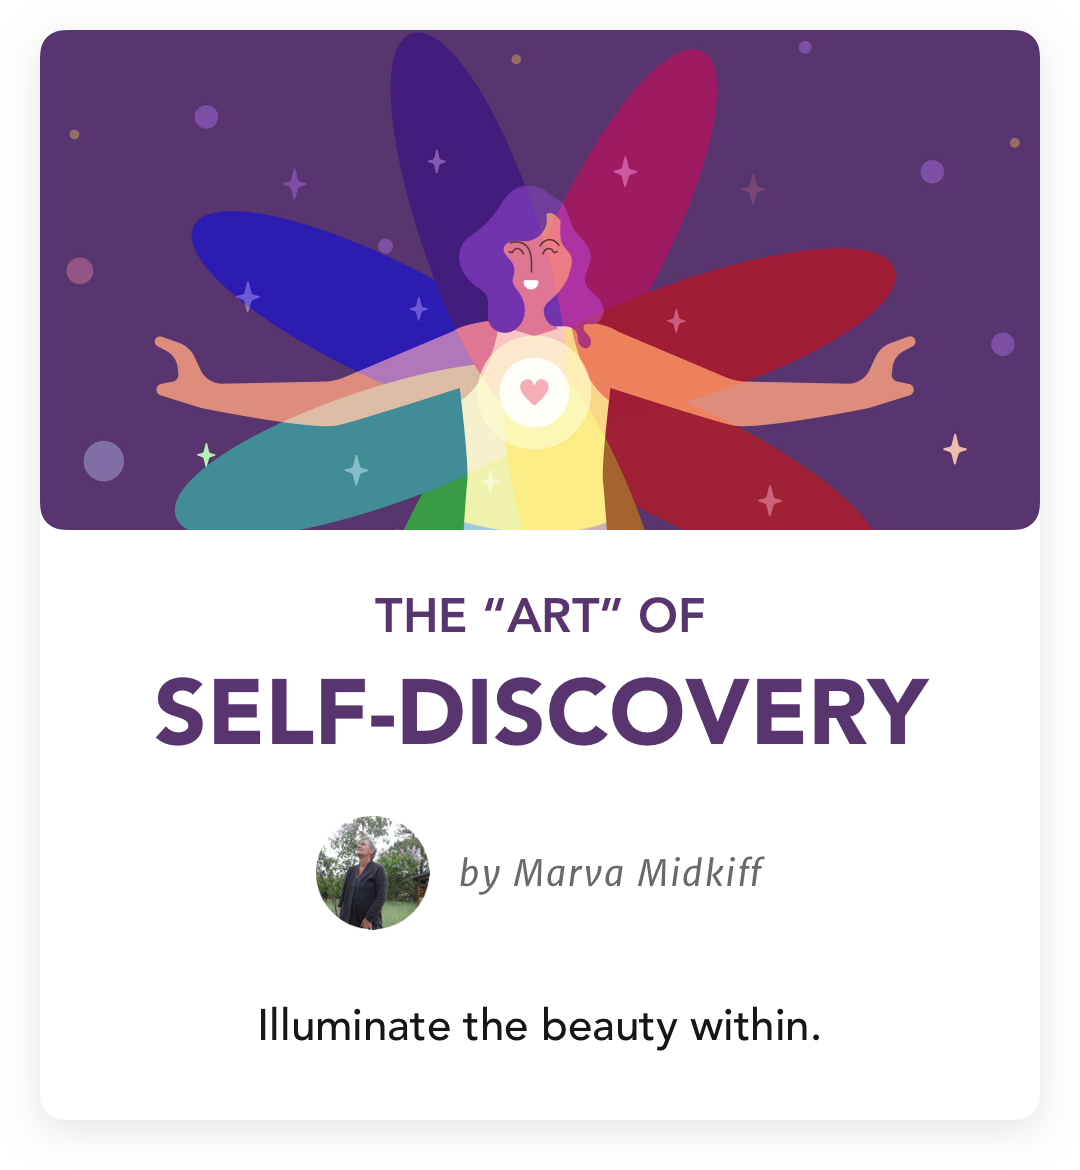 The "Art" of Self-Discovery